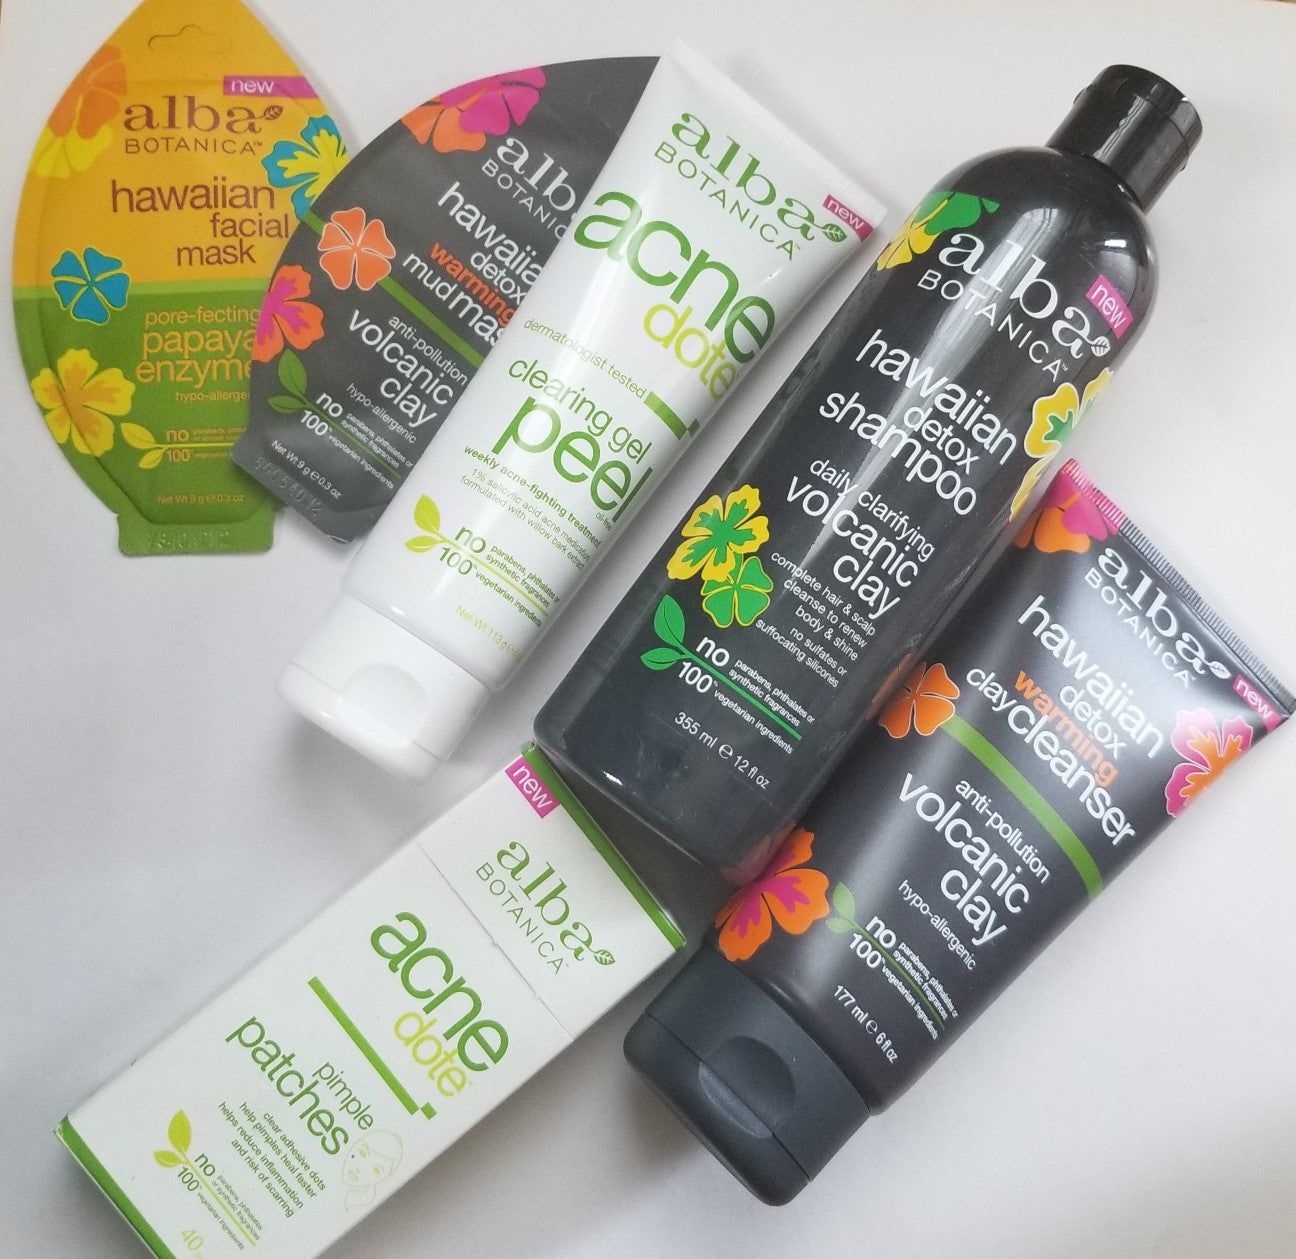 Review, Ingredients, Photos, Skincare Trend 2018, 2019, 2020: Alba Botanic, Hawaiian Detox Shampoo, Warming Clay Ceanser, Mud Mask, Acne Dote Pimple Patches, Clearing Gel Peel, Facial Mask